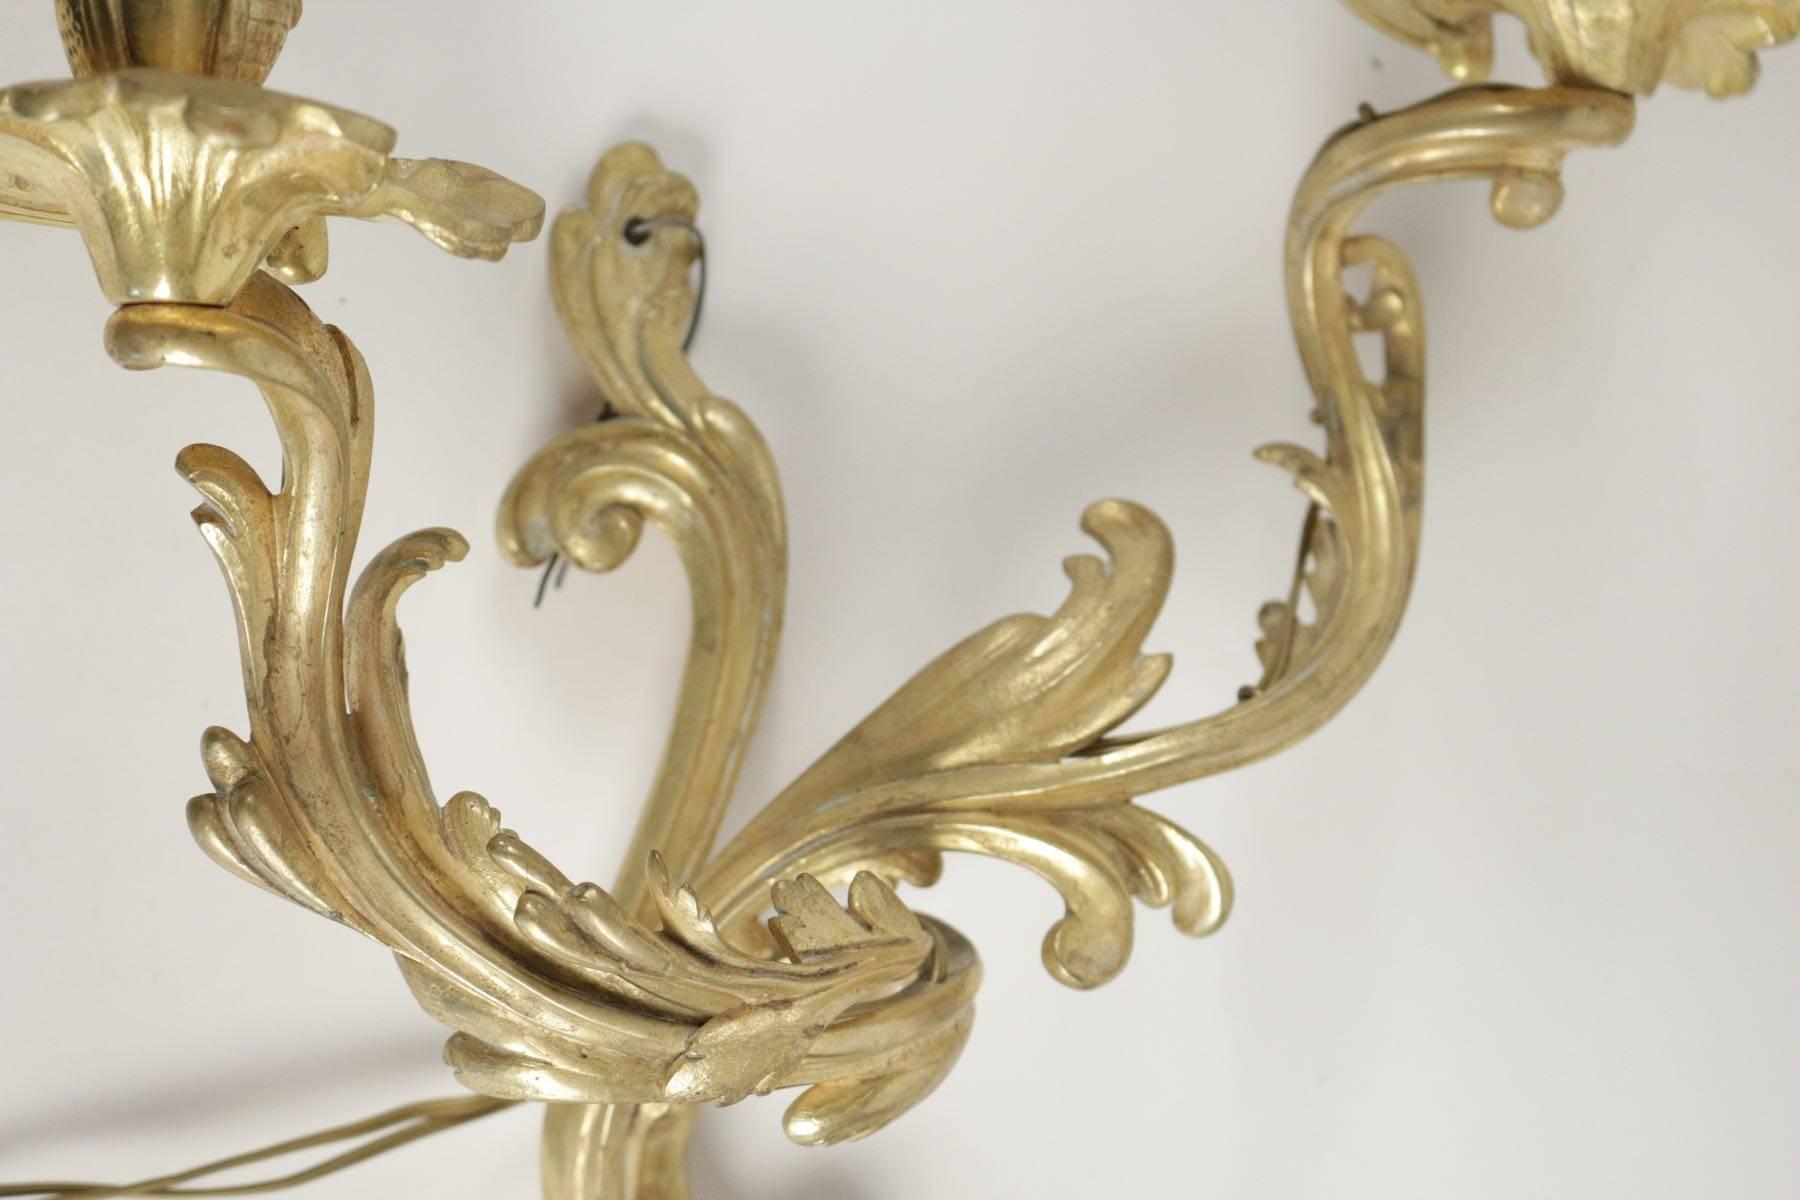 Gilt Pair of Bronze Doré Sconces in the Style of Louis XV from the 19th Century